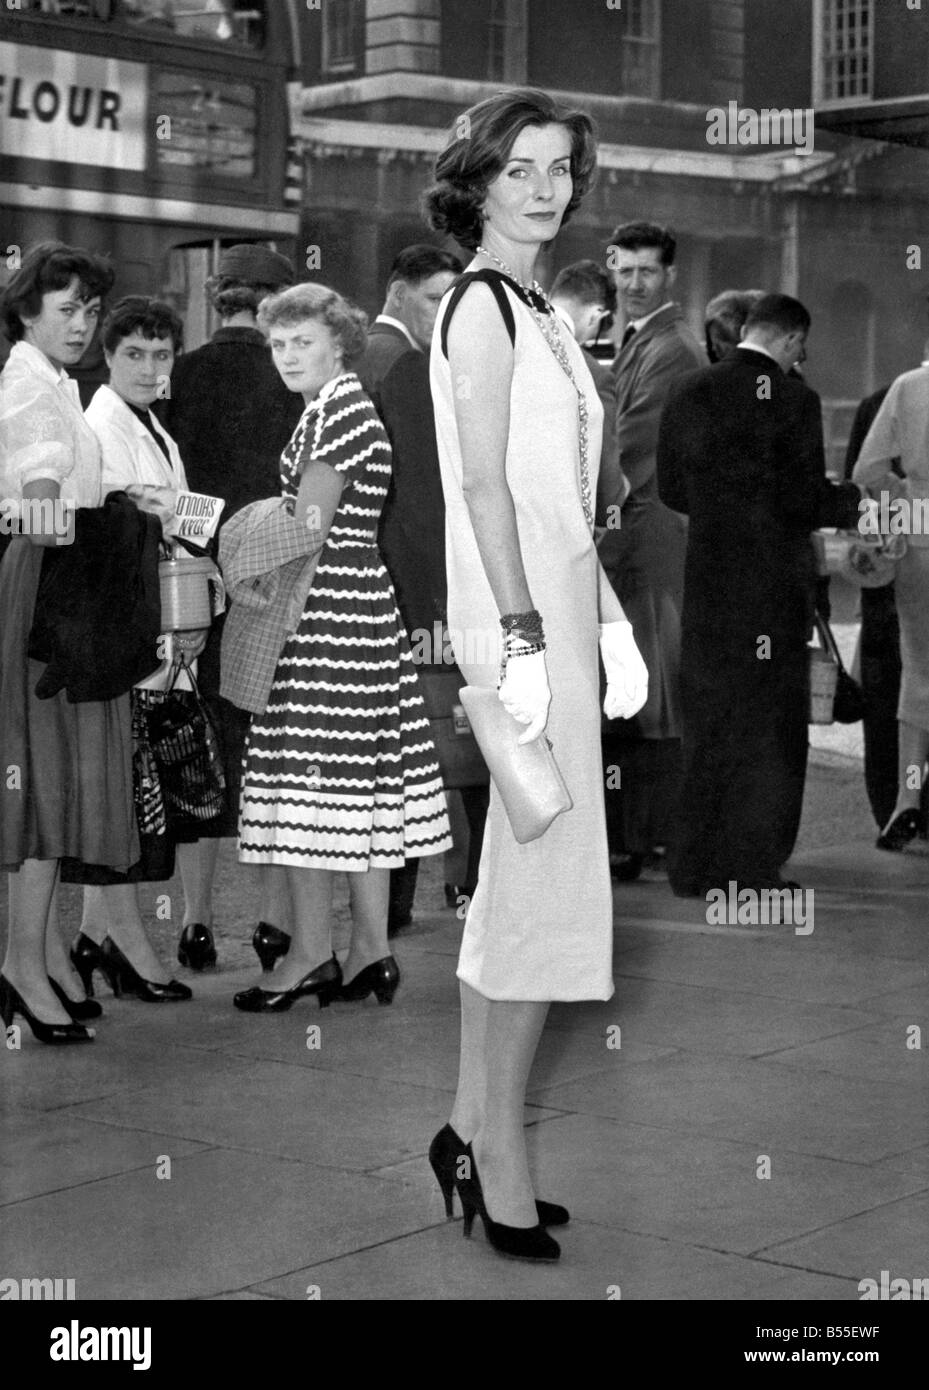 Fashion. The dress that turned their heads. This is model girl Marguerite in the Sack Dress that she wore in London yesterday (22-8-57). It's the latest line in fashion from Italy and one thing is certain - no girl who ears it is likely to be overlooked in a crowd. Marguerite's reaction was: 'It makes me feel very naughty'. As for the crowd is reaction... Men nearly fell off their motor bikes, bus conductors forgot to clip their tickets and even sober-looking bowler-hatted City gentlemen goggled. August 1957 P008680 Stock Photo